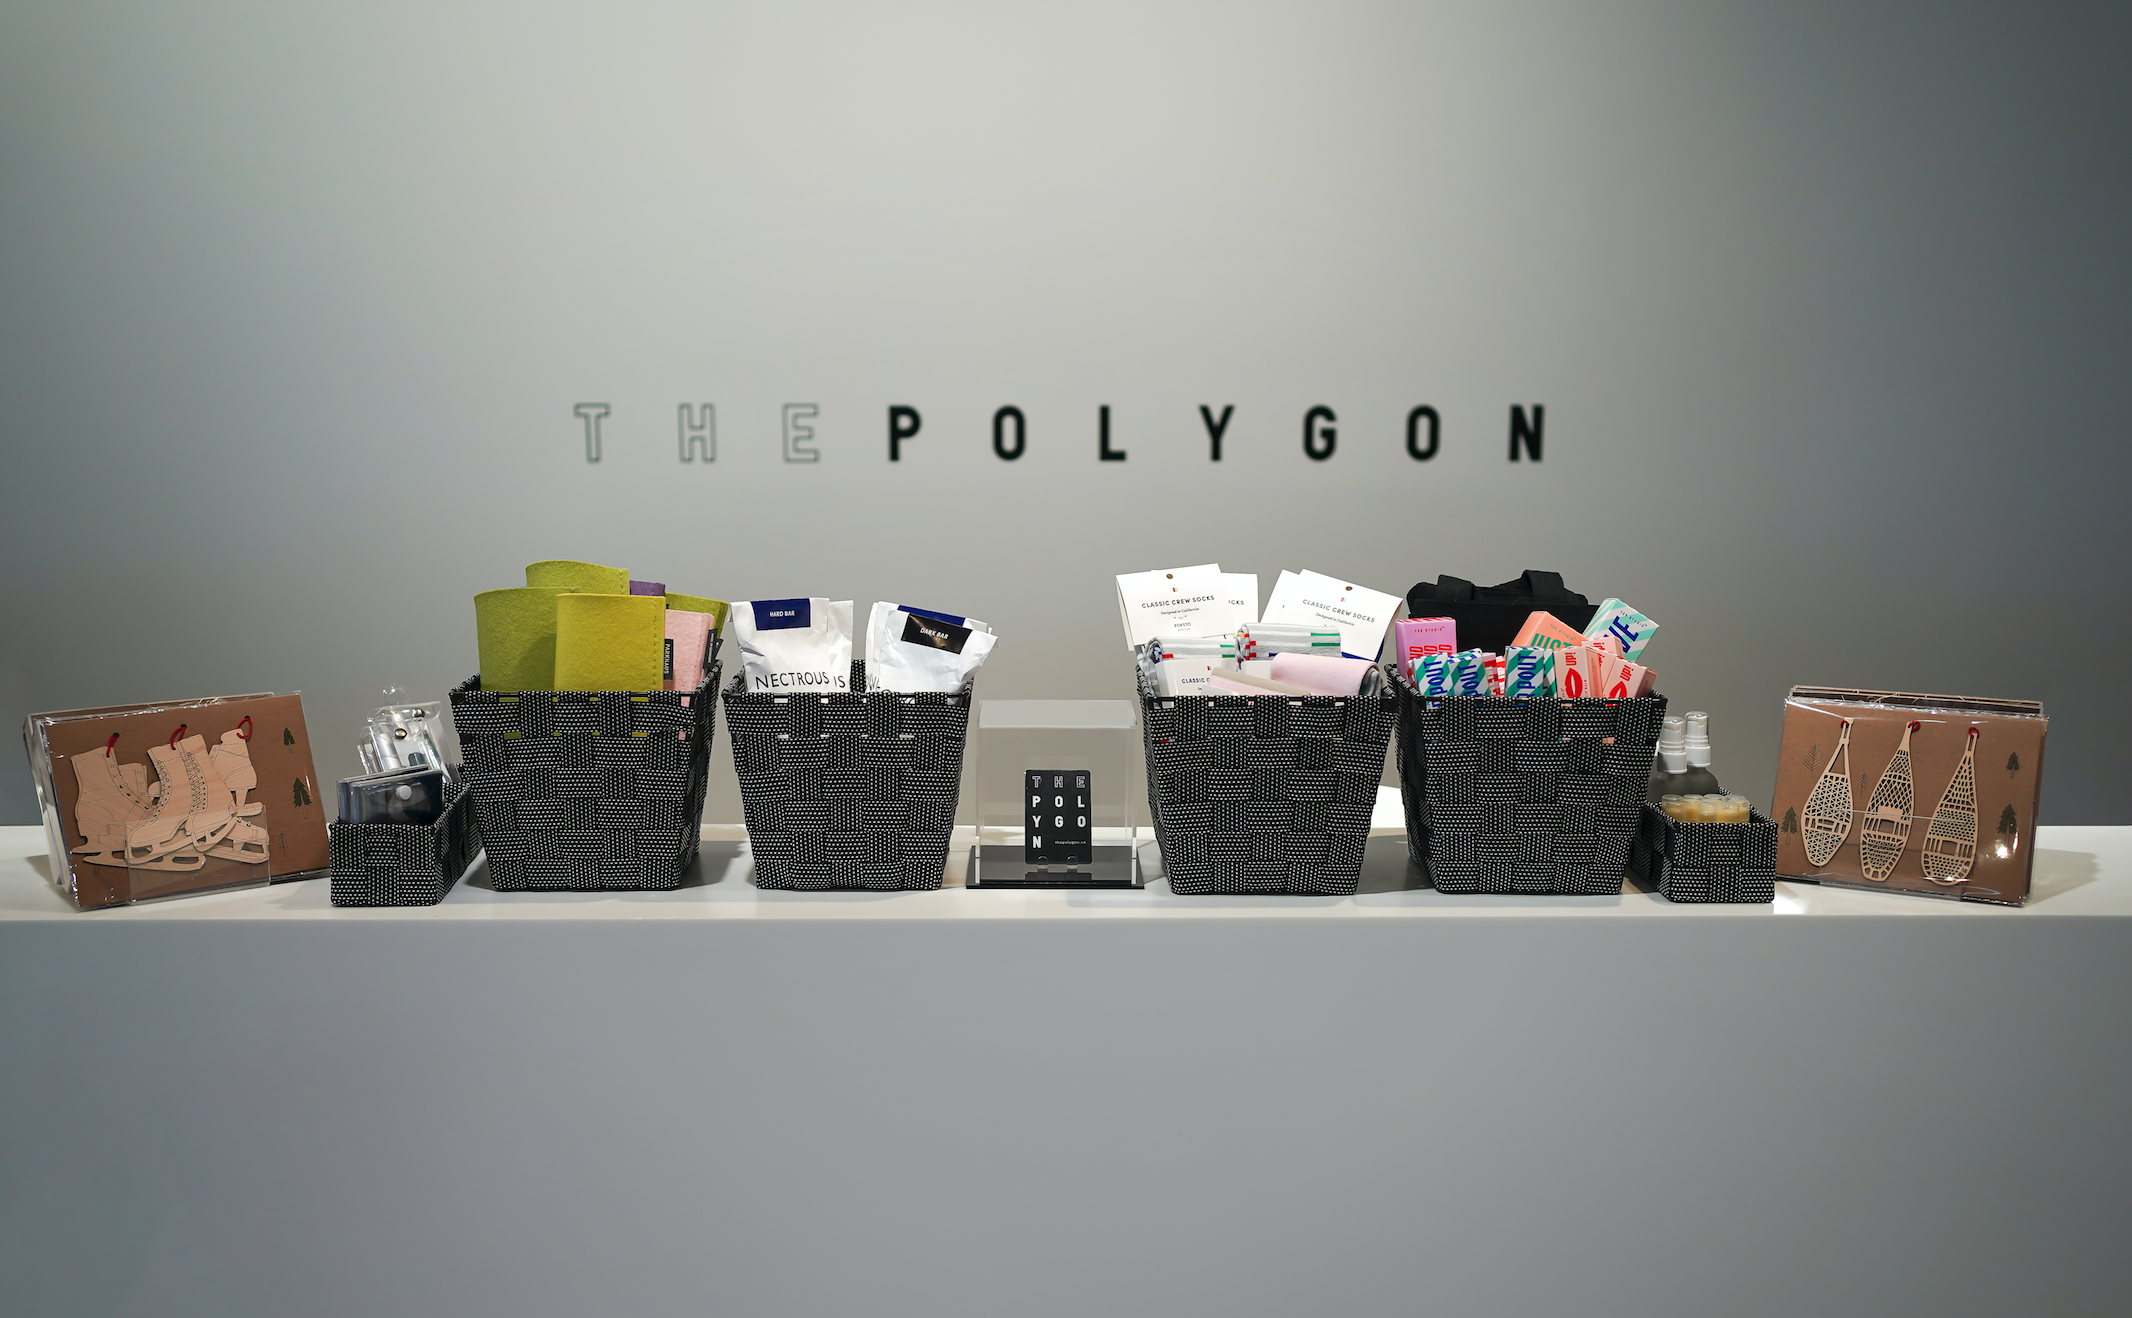 Meet the Maker at The Polygon Gallery